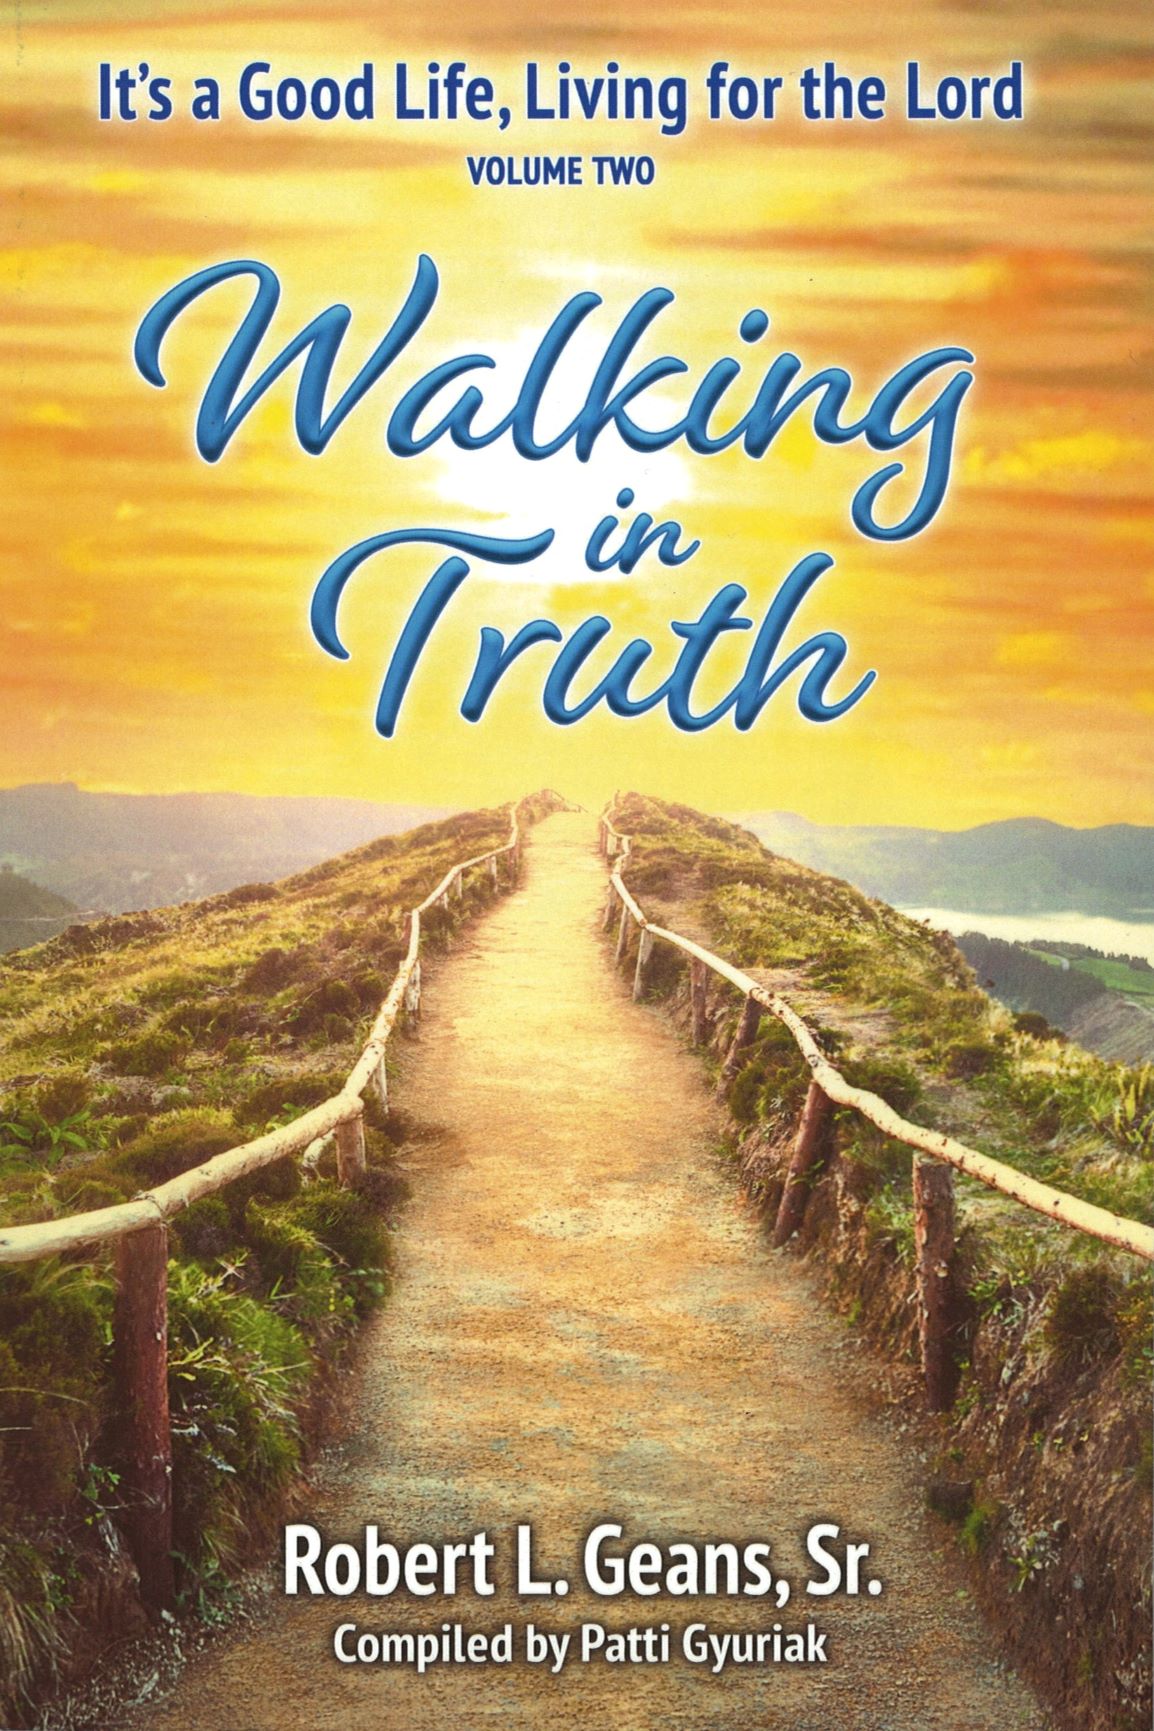 It’s a Good Life Living for the Lord VOL2 Walking In Truth - Robert Geans Sr